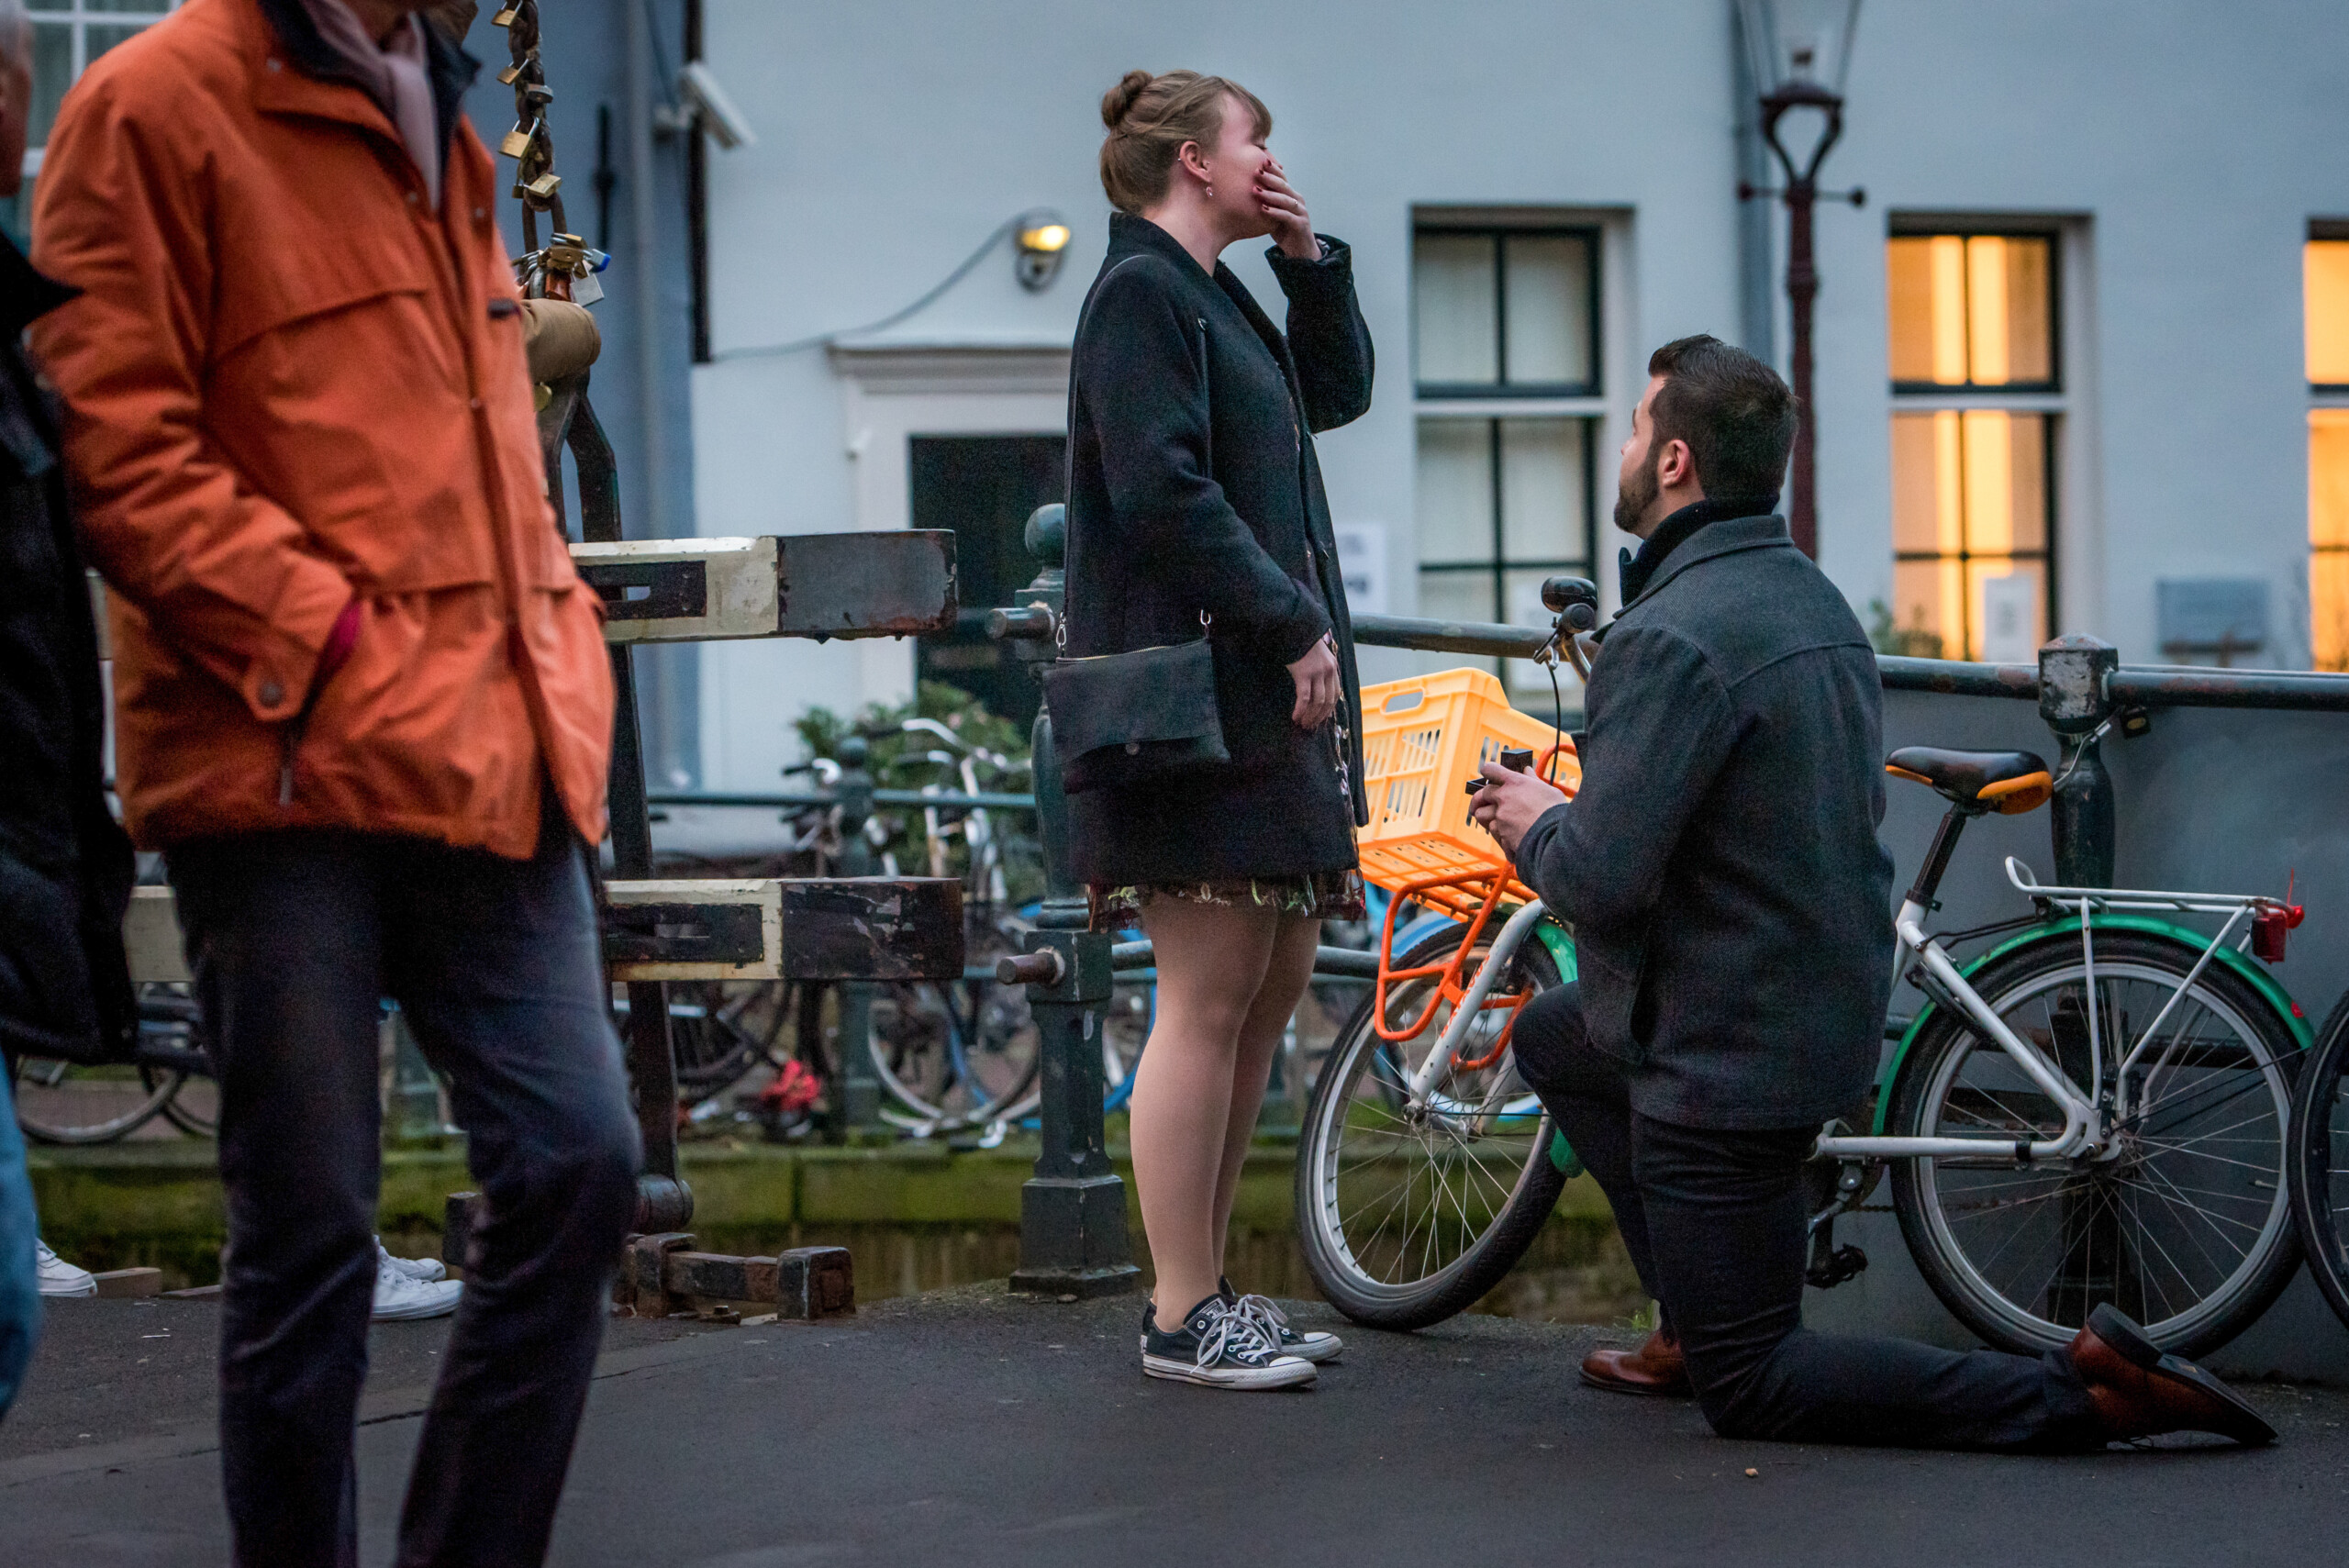 Proposal photoshoot by Theo, Localgrapher in Amsterdam